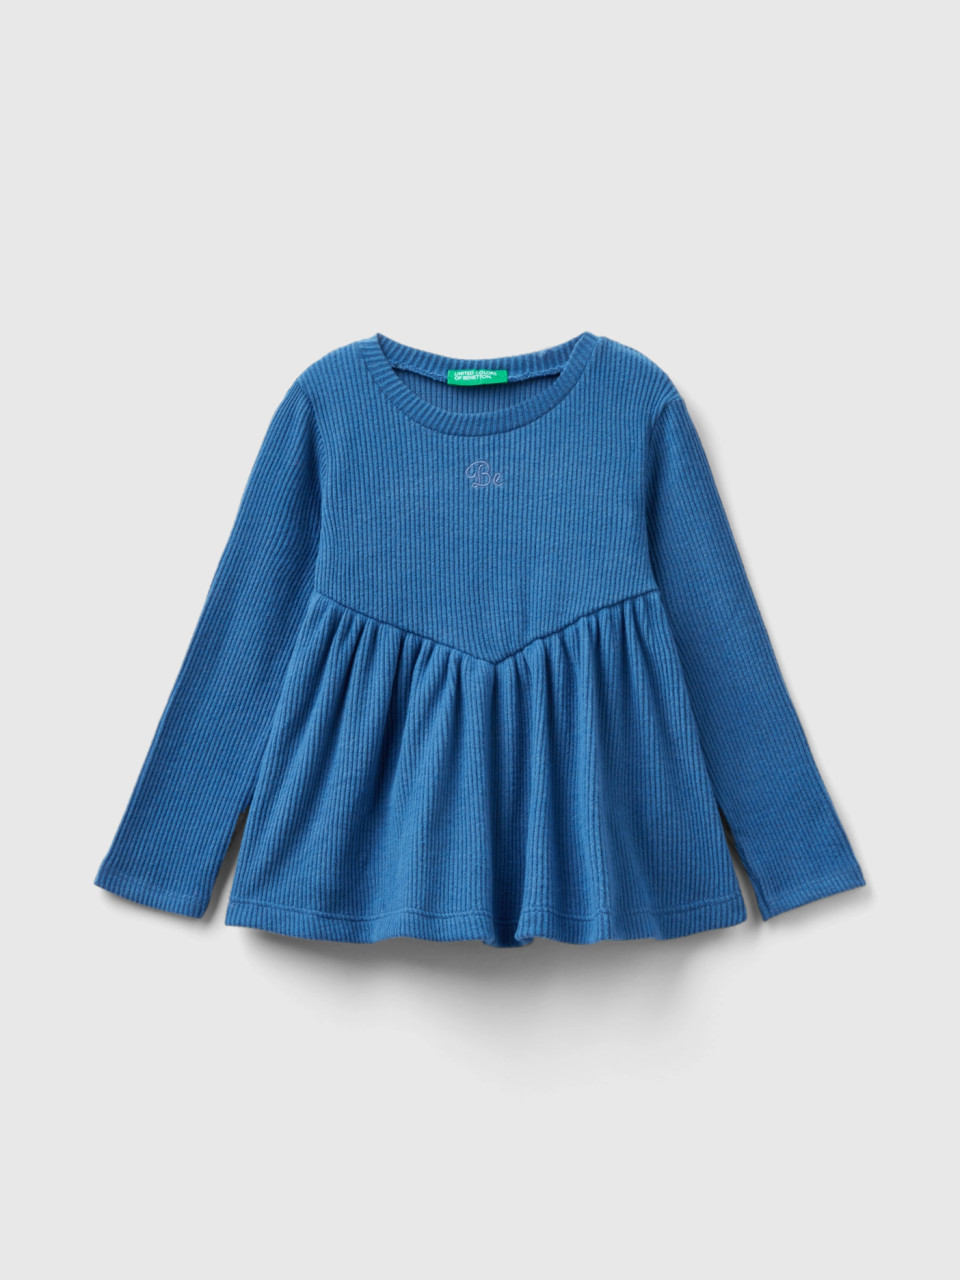 Benetton, Warm Ribbed T-shirt With Rouching, Air Force Blue, Kids